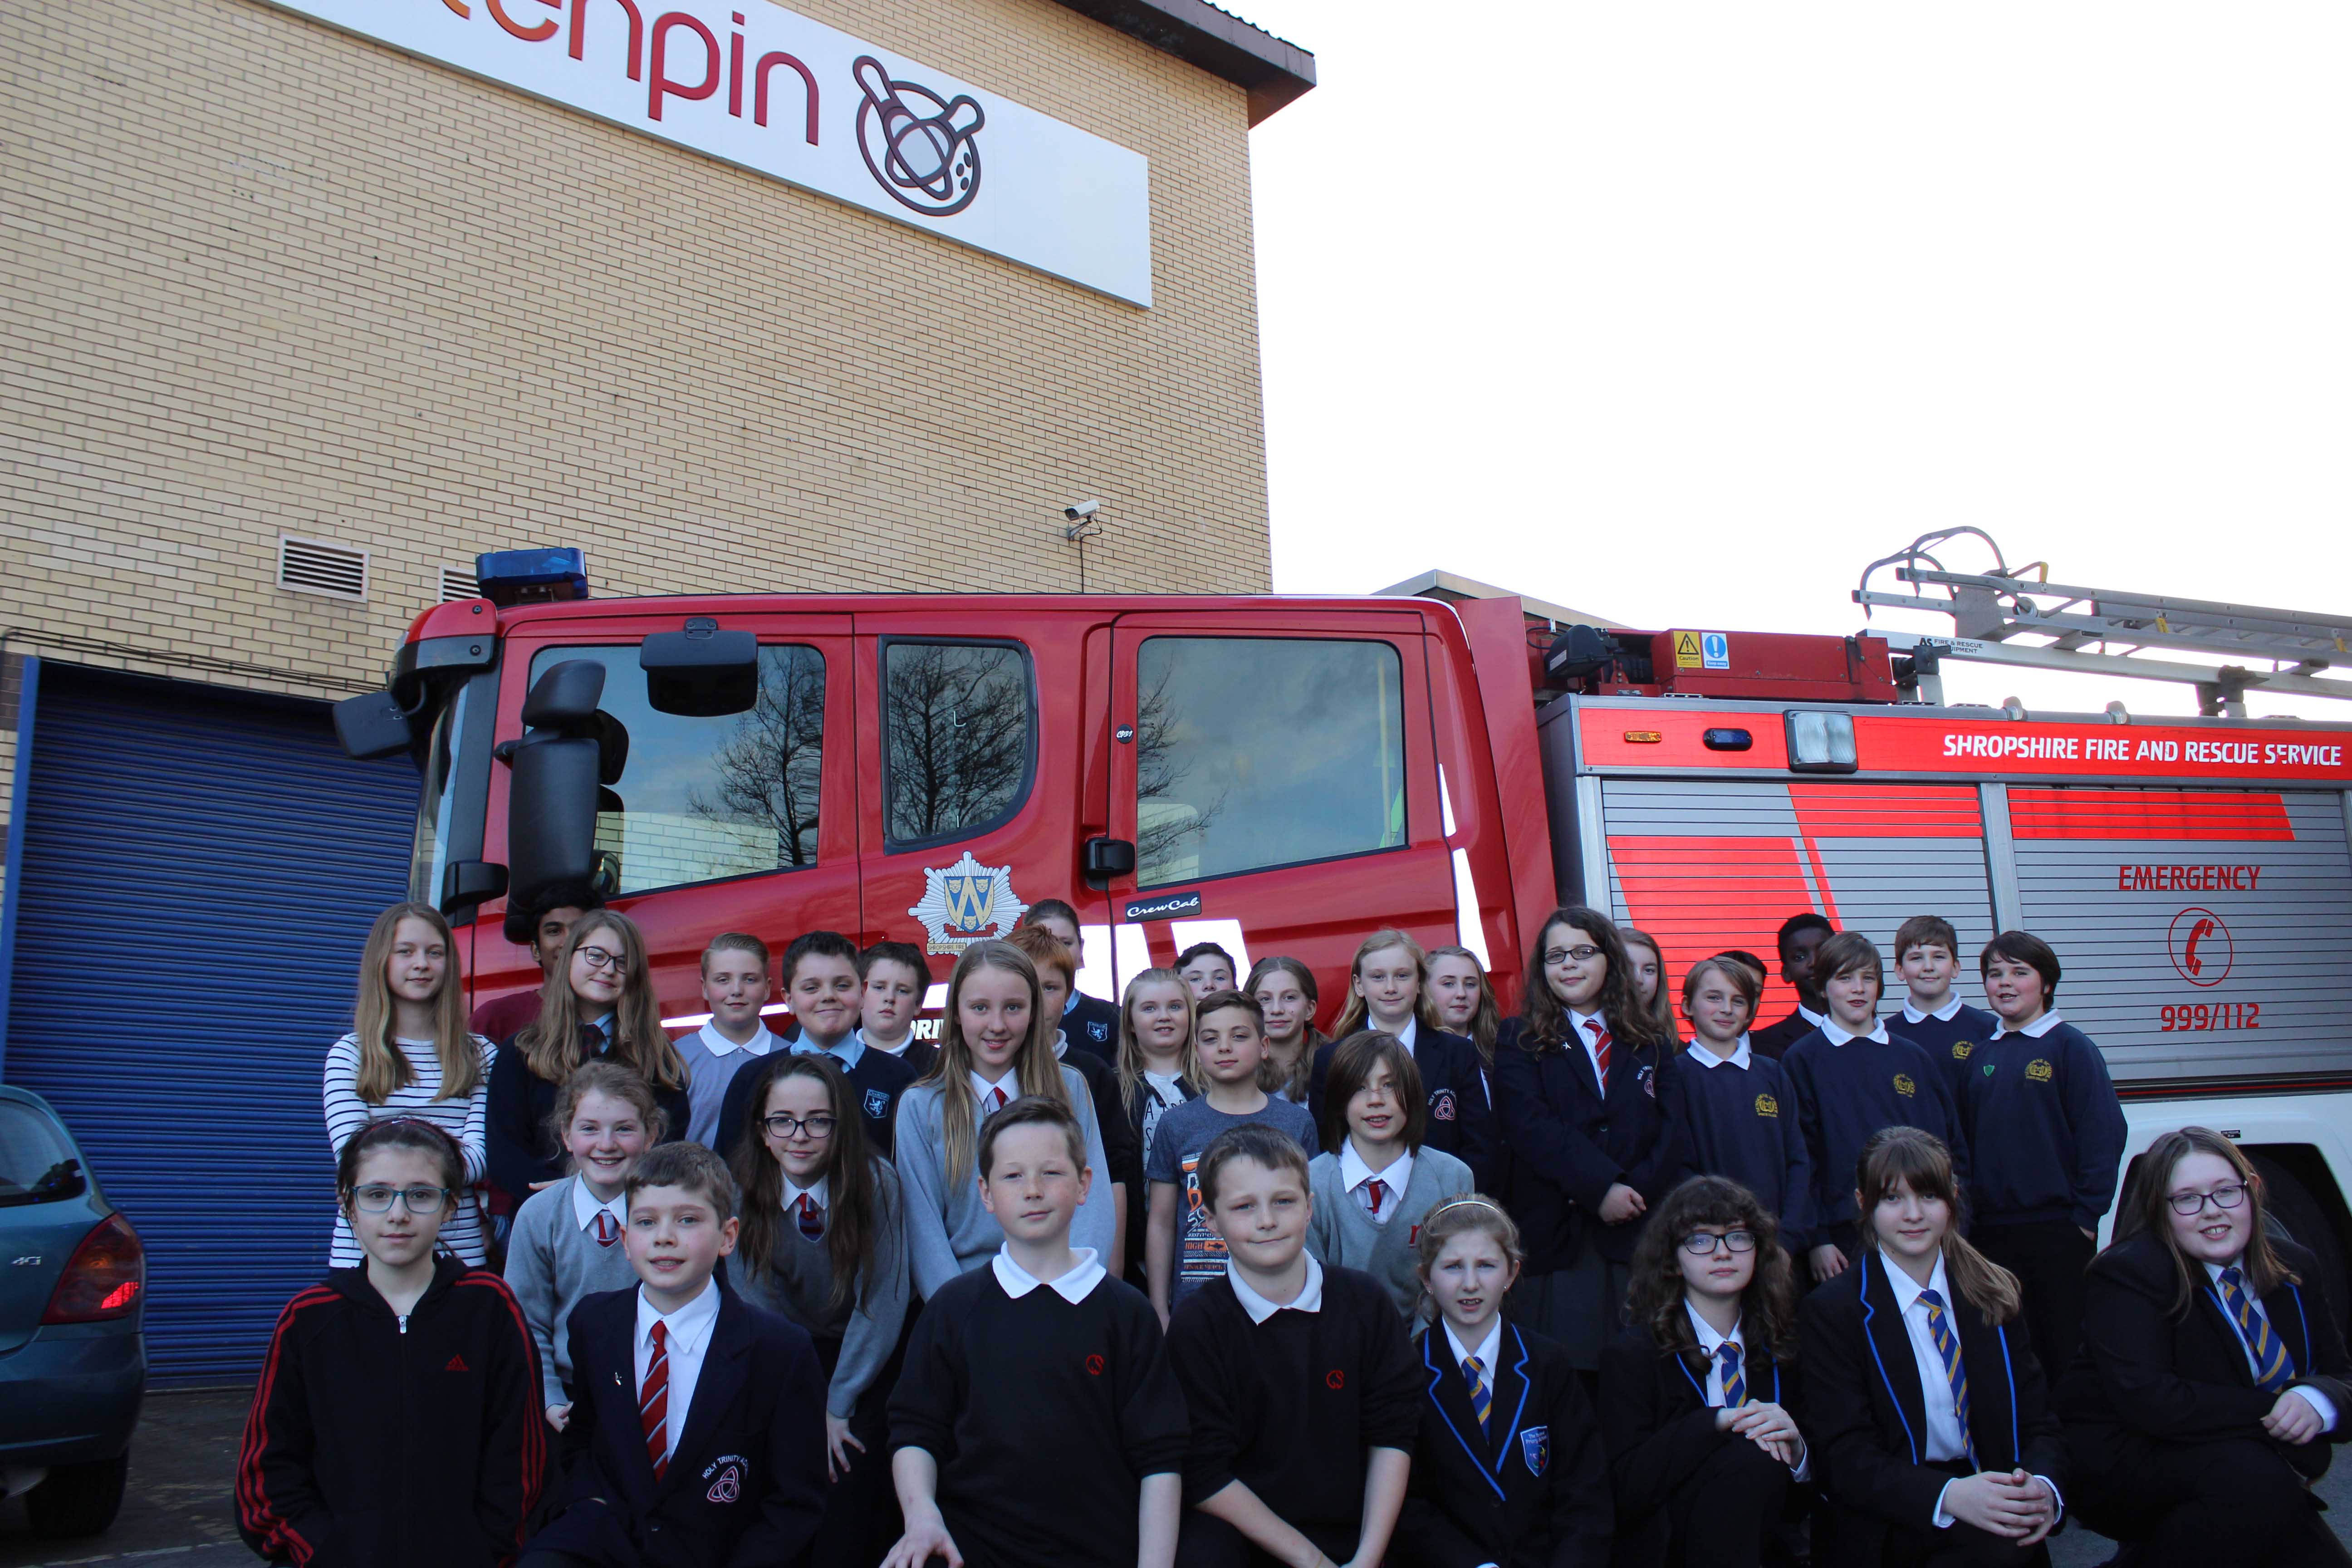 More than 2,400 Shropshire children learned important life skills in the annual fire safety quiz Pictured are some of the winning teams from across the county.